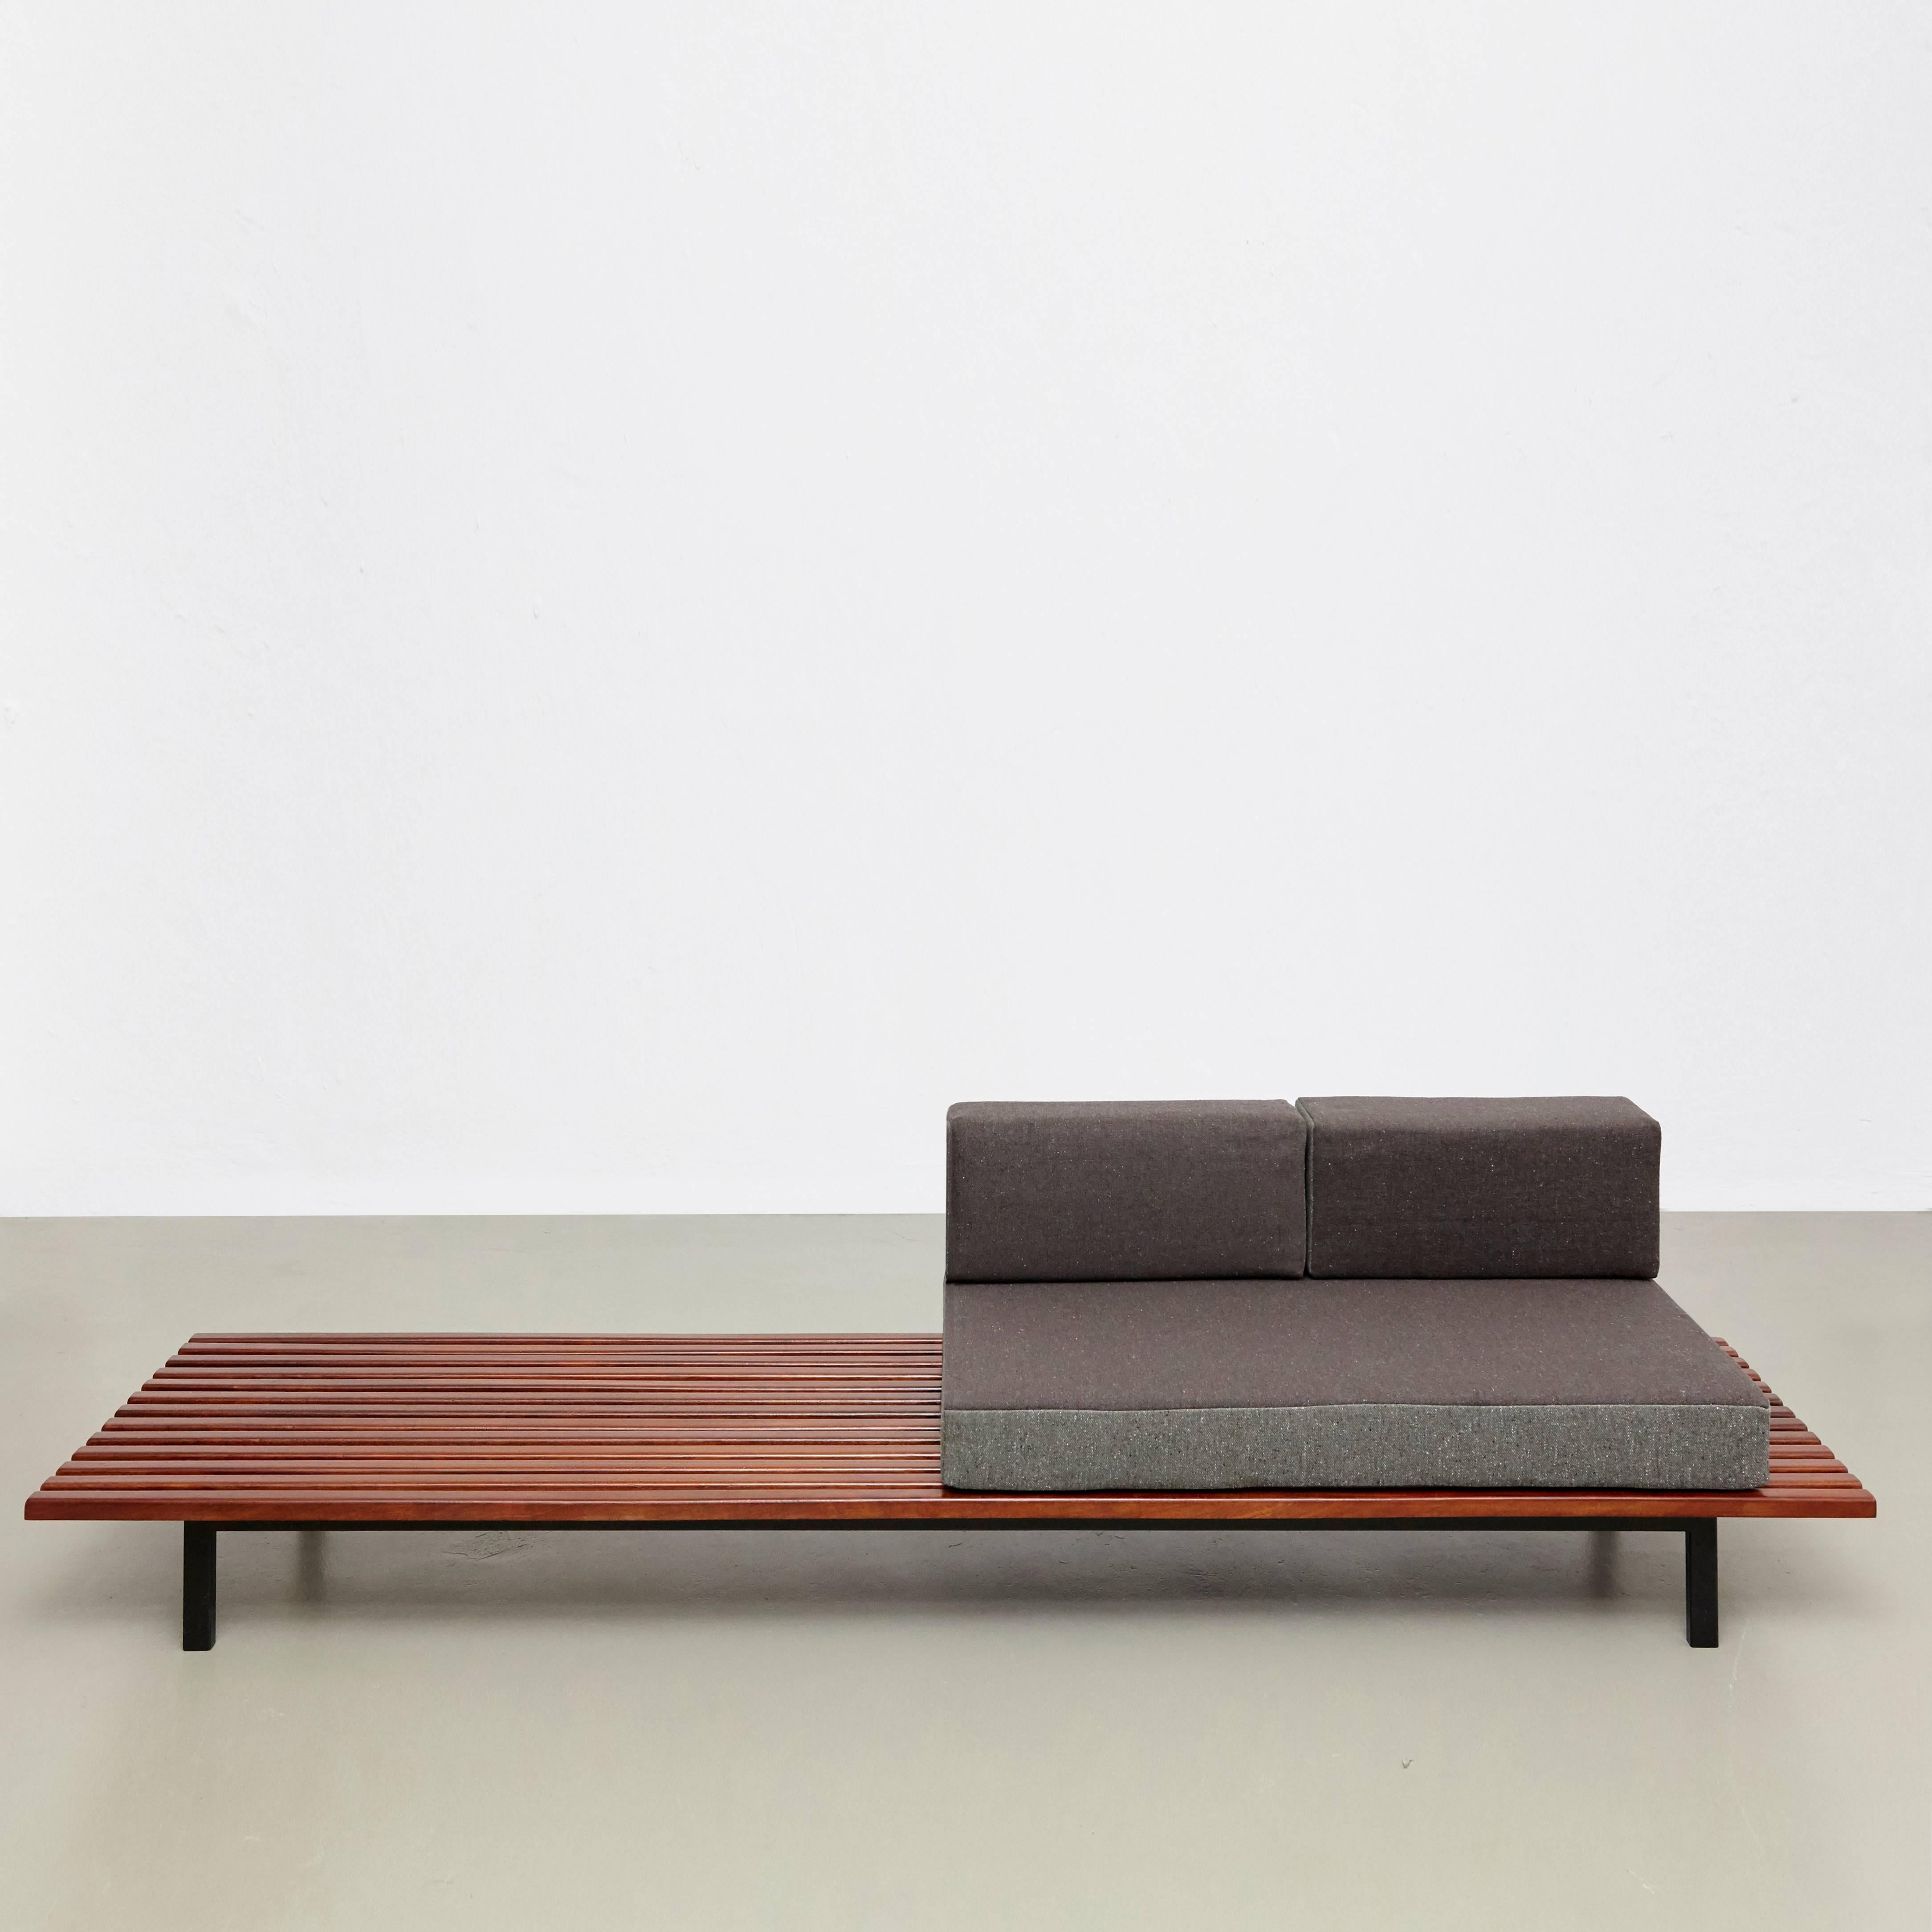 Bench from Cite Cansado, Mauritania, designed by Charlotte Perriand.
Mahogany wood, oak, lacquered metal and fabric.

In good original condition, with minor wear consistent with age and use, preserving a beautiful patina. 

The cushions has